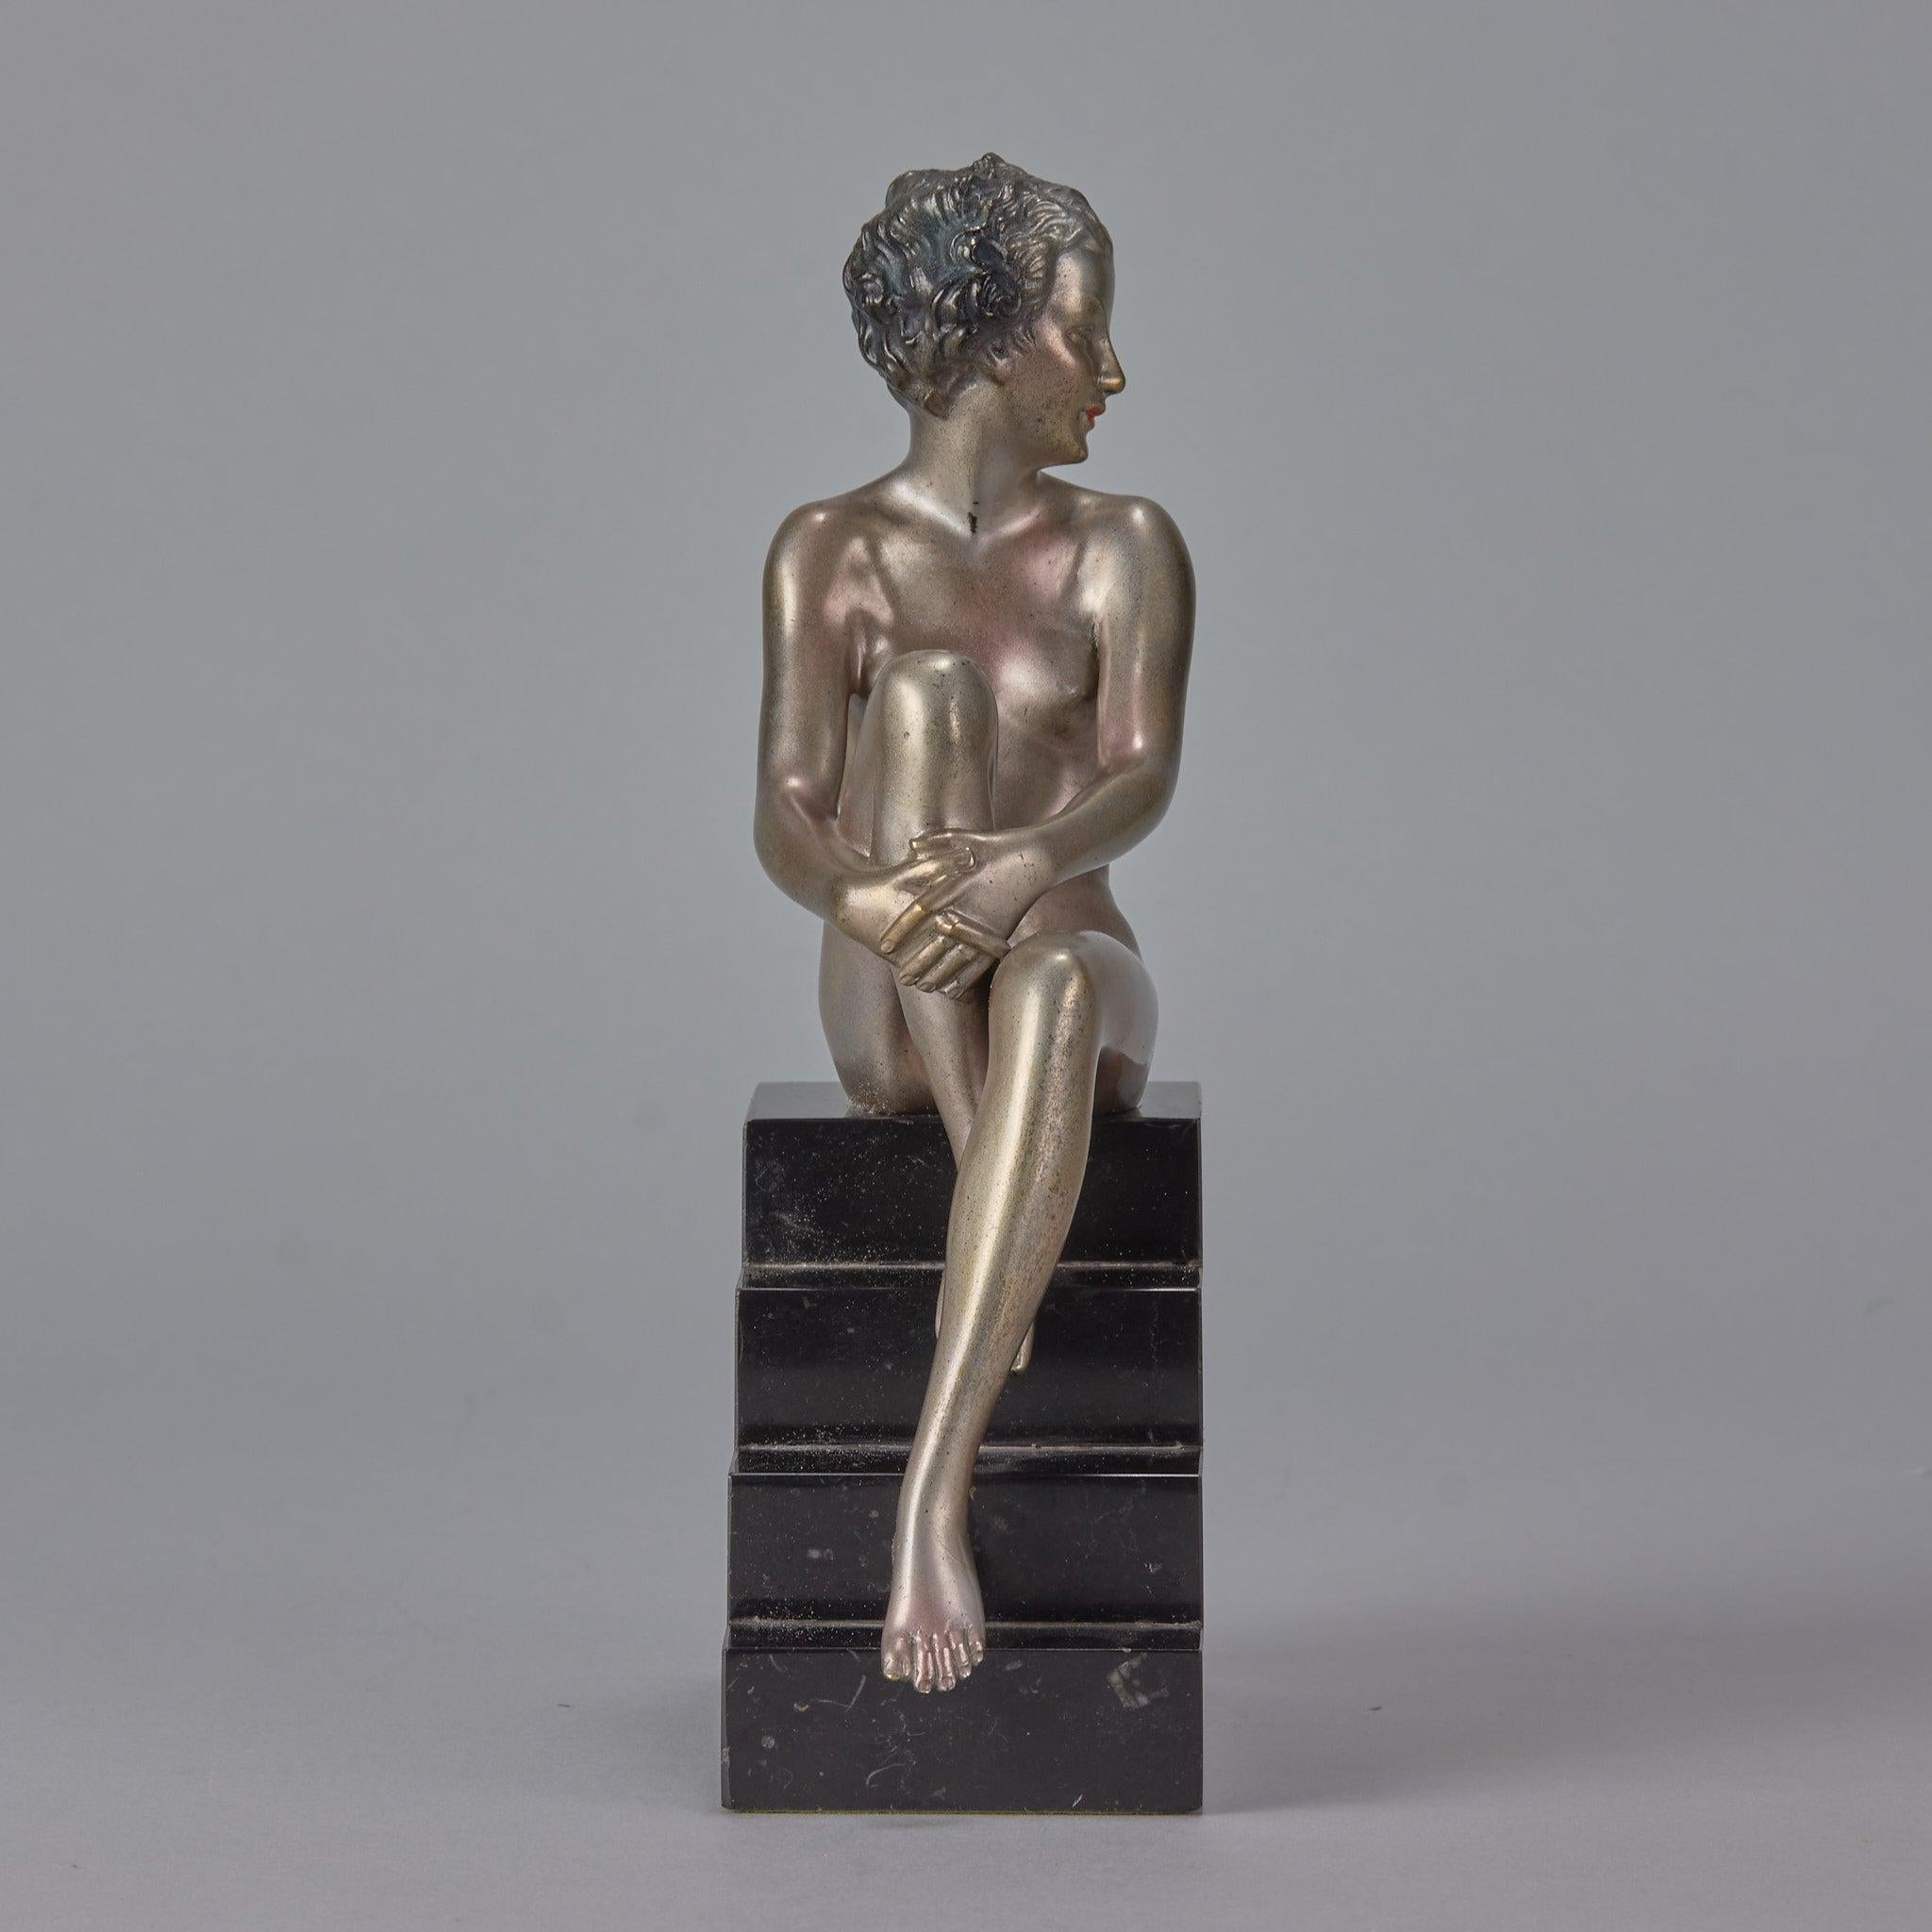 Cold-Painted “Seated Beauty” Art Deco Cold Painted Bronze Sculpture by Josef Lorenzl For Sale